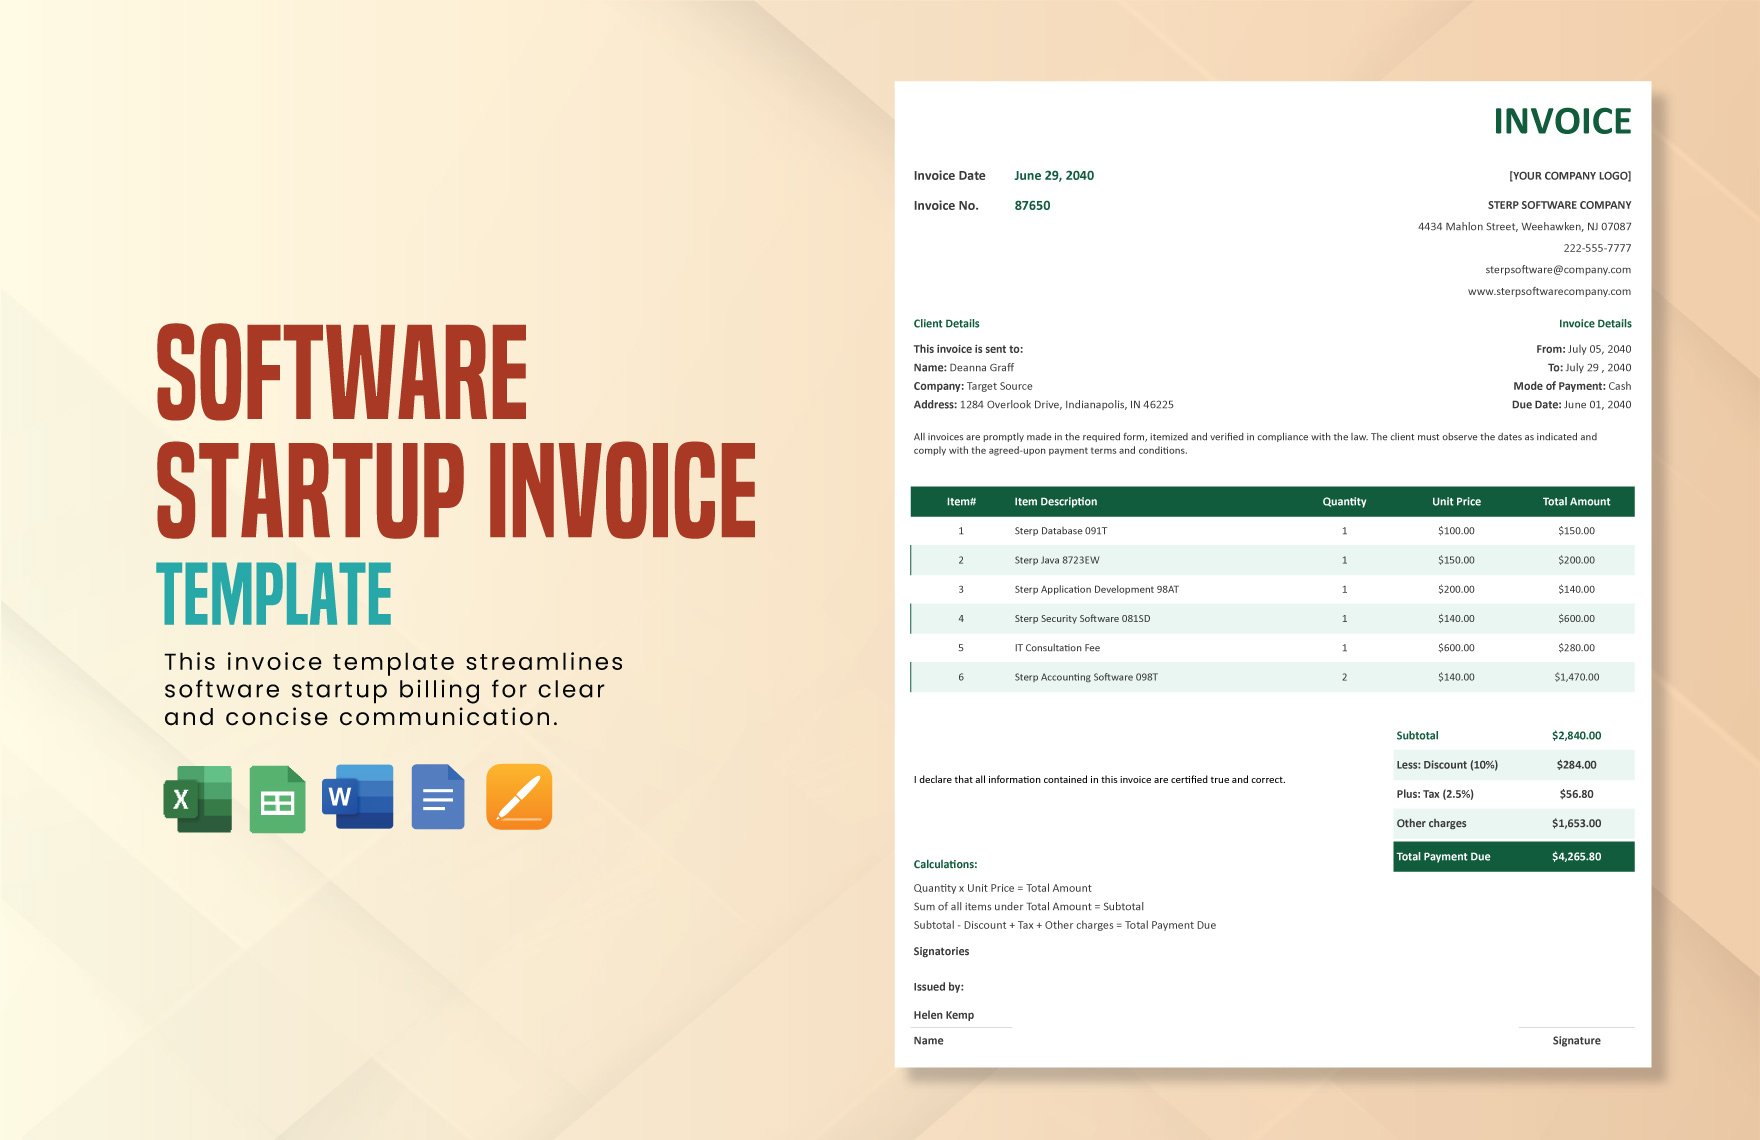 Software Startup Invoice Template in Word, Google Docs, Excel, Google Sheets, Apple Pages